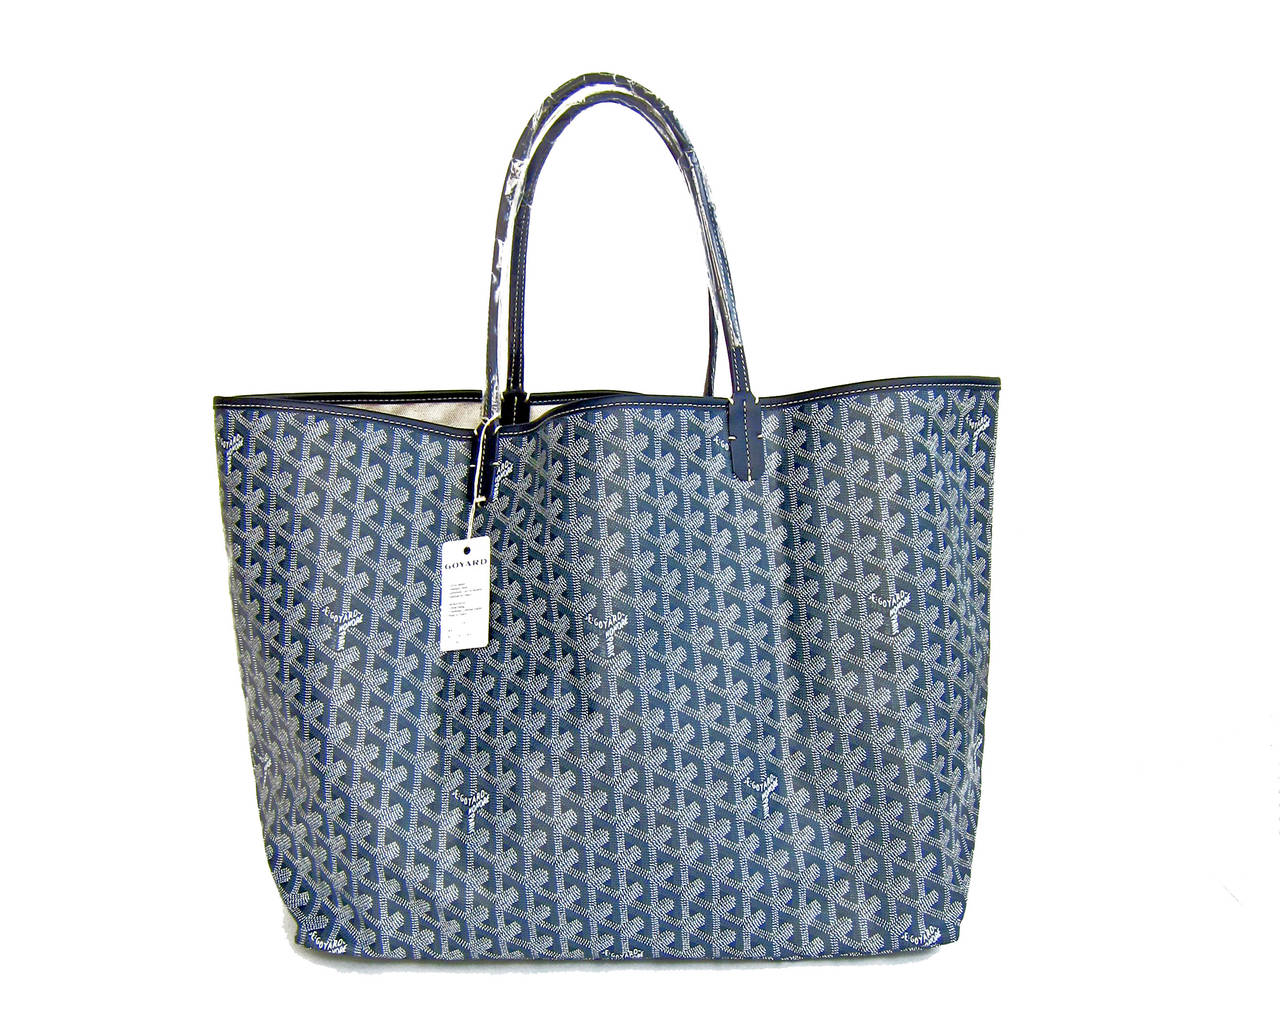 Goyard St Louis GM Grey Chevron Tote Bag Chic

Brand New coming with yellow Goyard sleeper and inner pochette
Traditional Goyard Chevron Tote in grey canvas 
GM (large) size: Length: 23